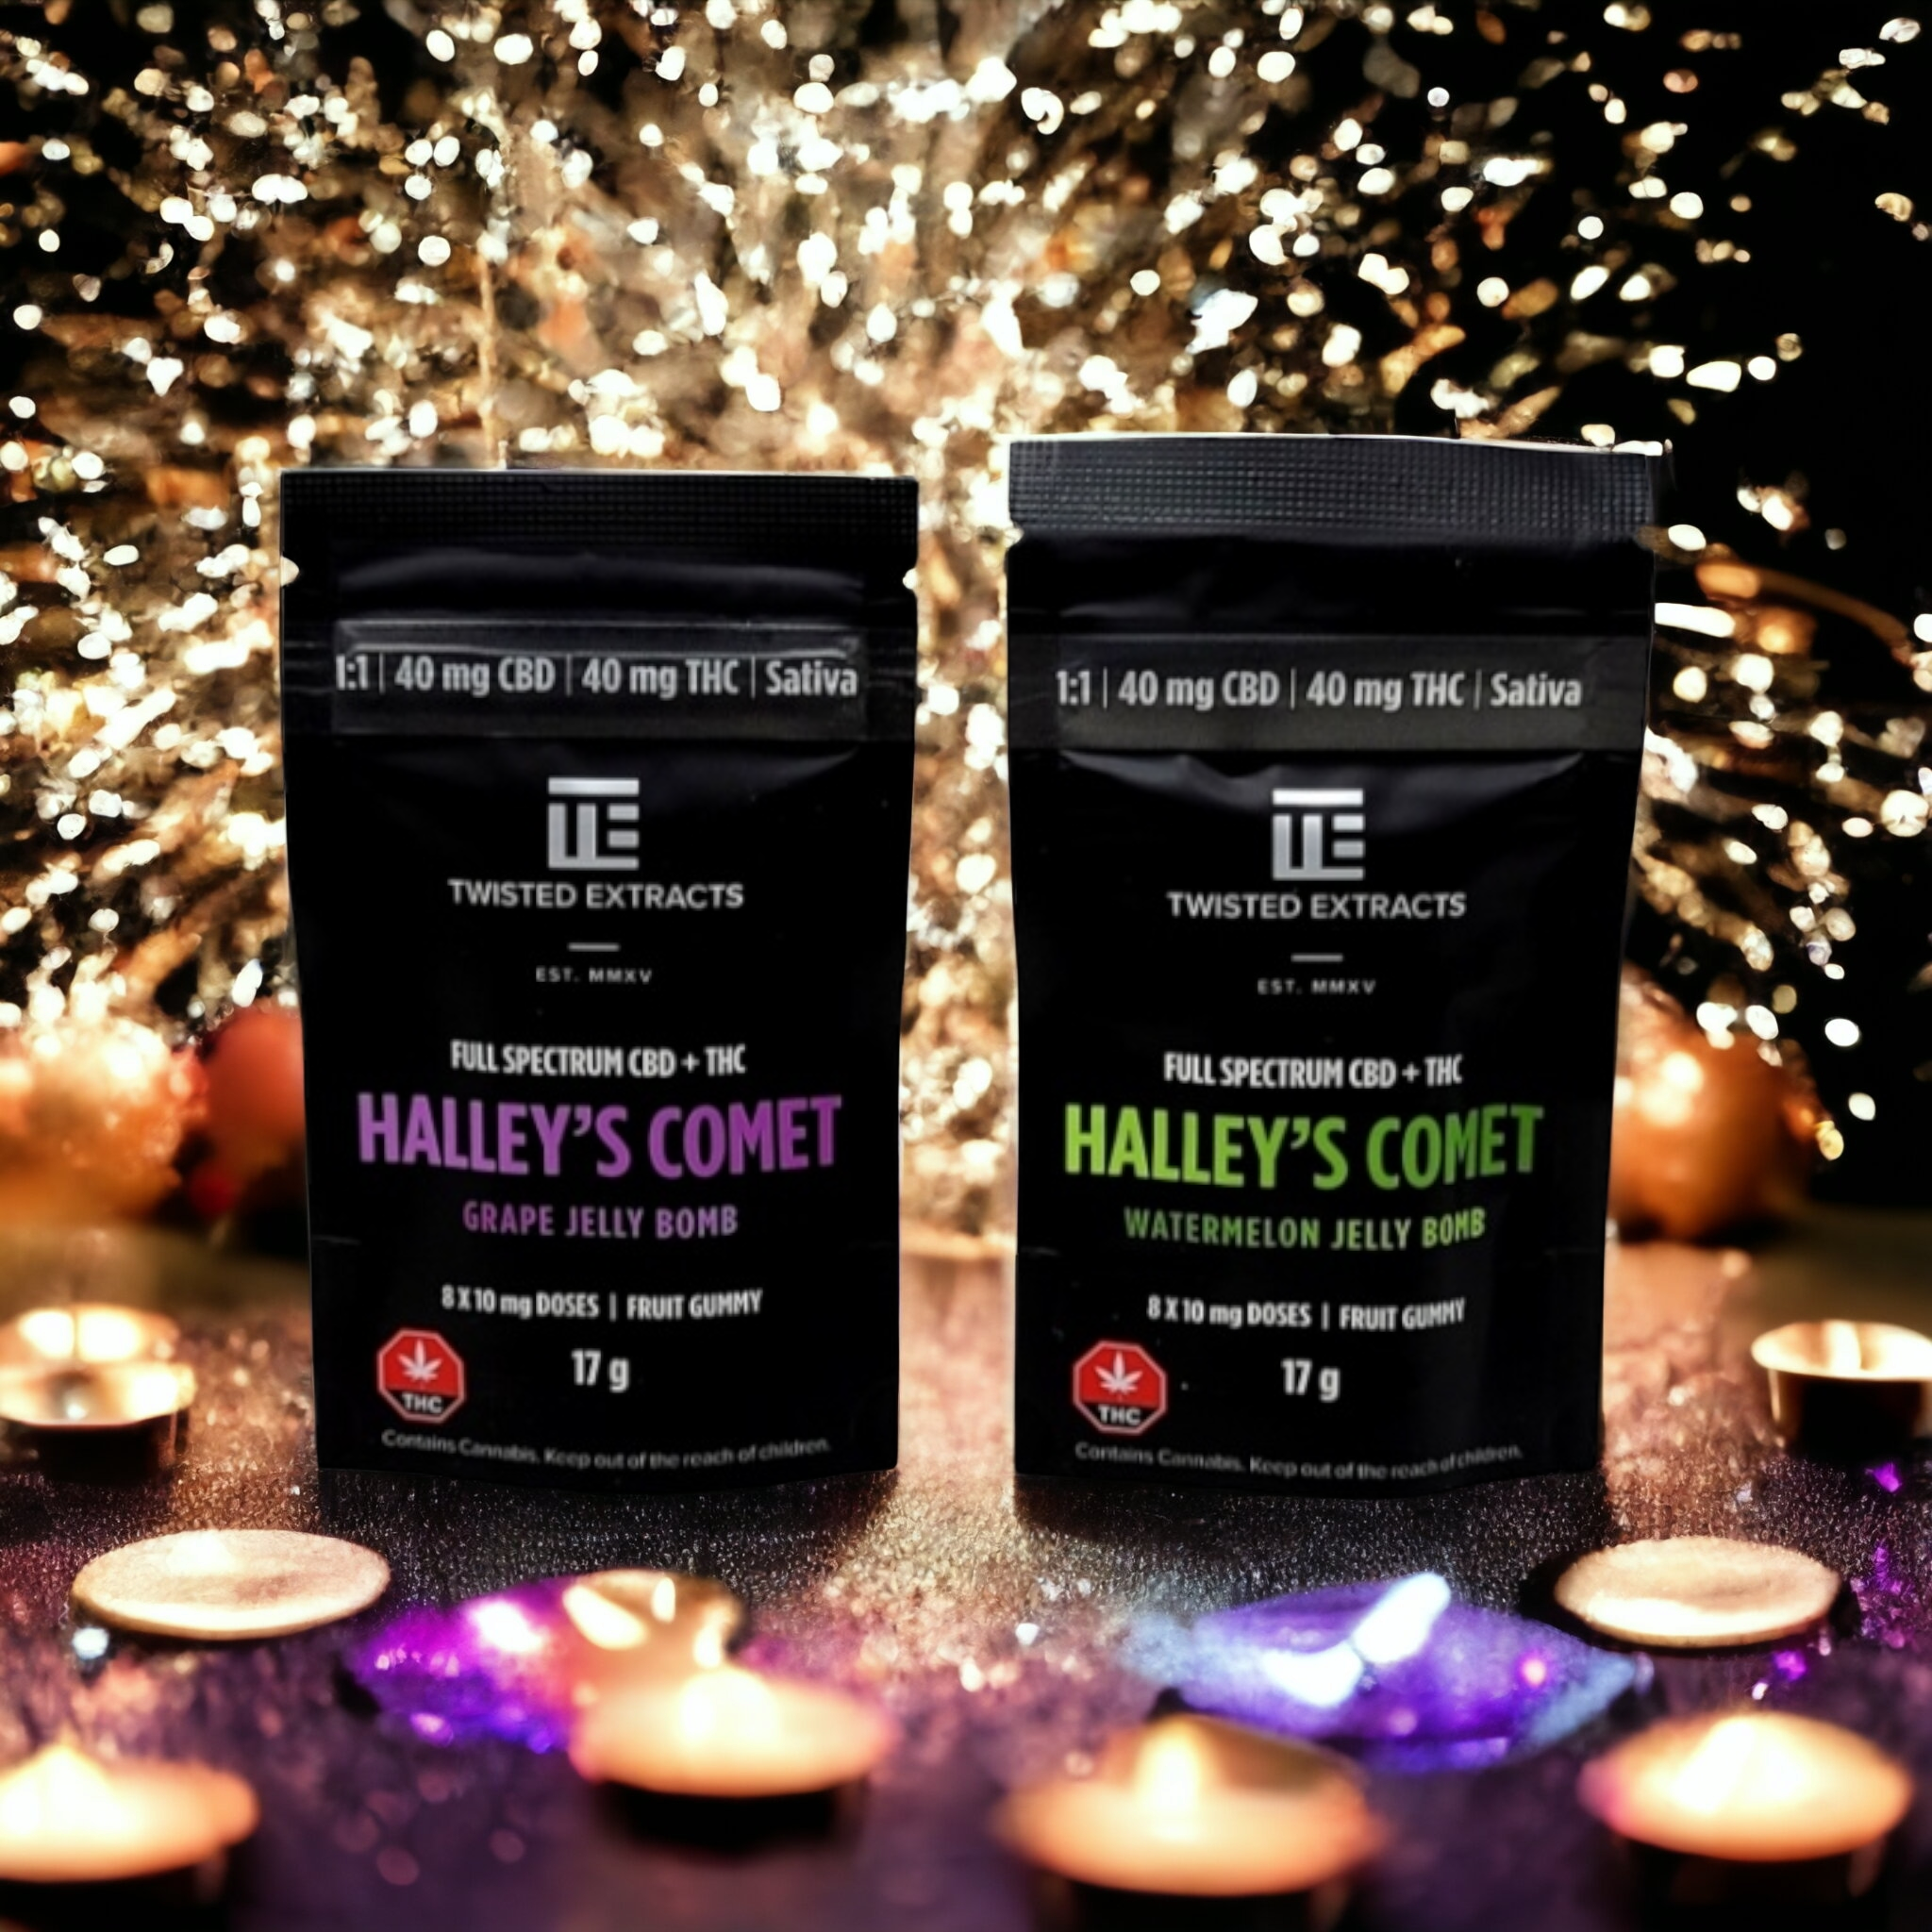 Halleys Comet Jelly Bomb - Twisted Extracts